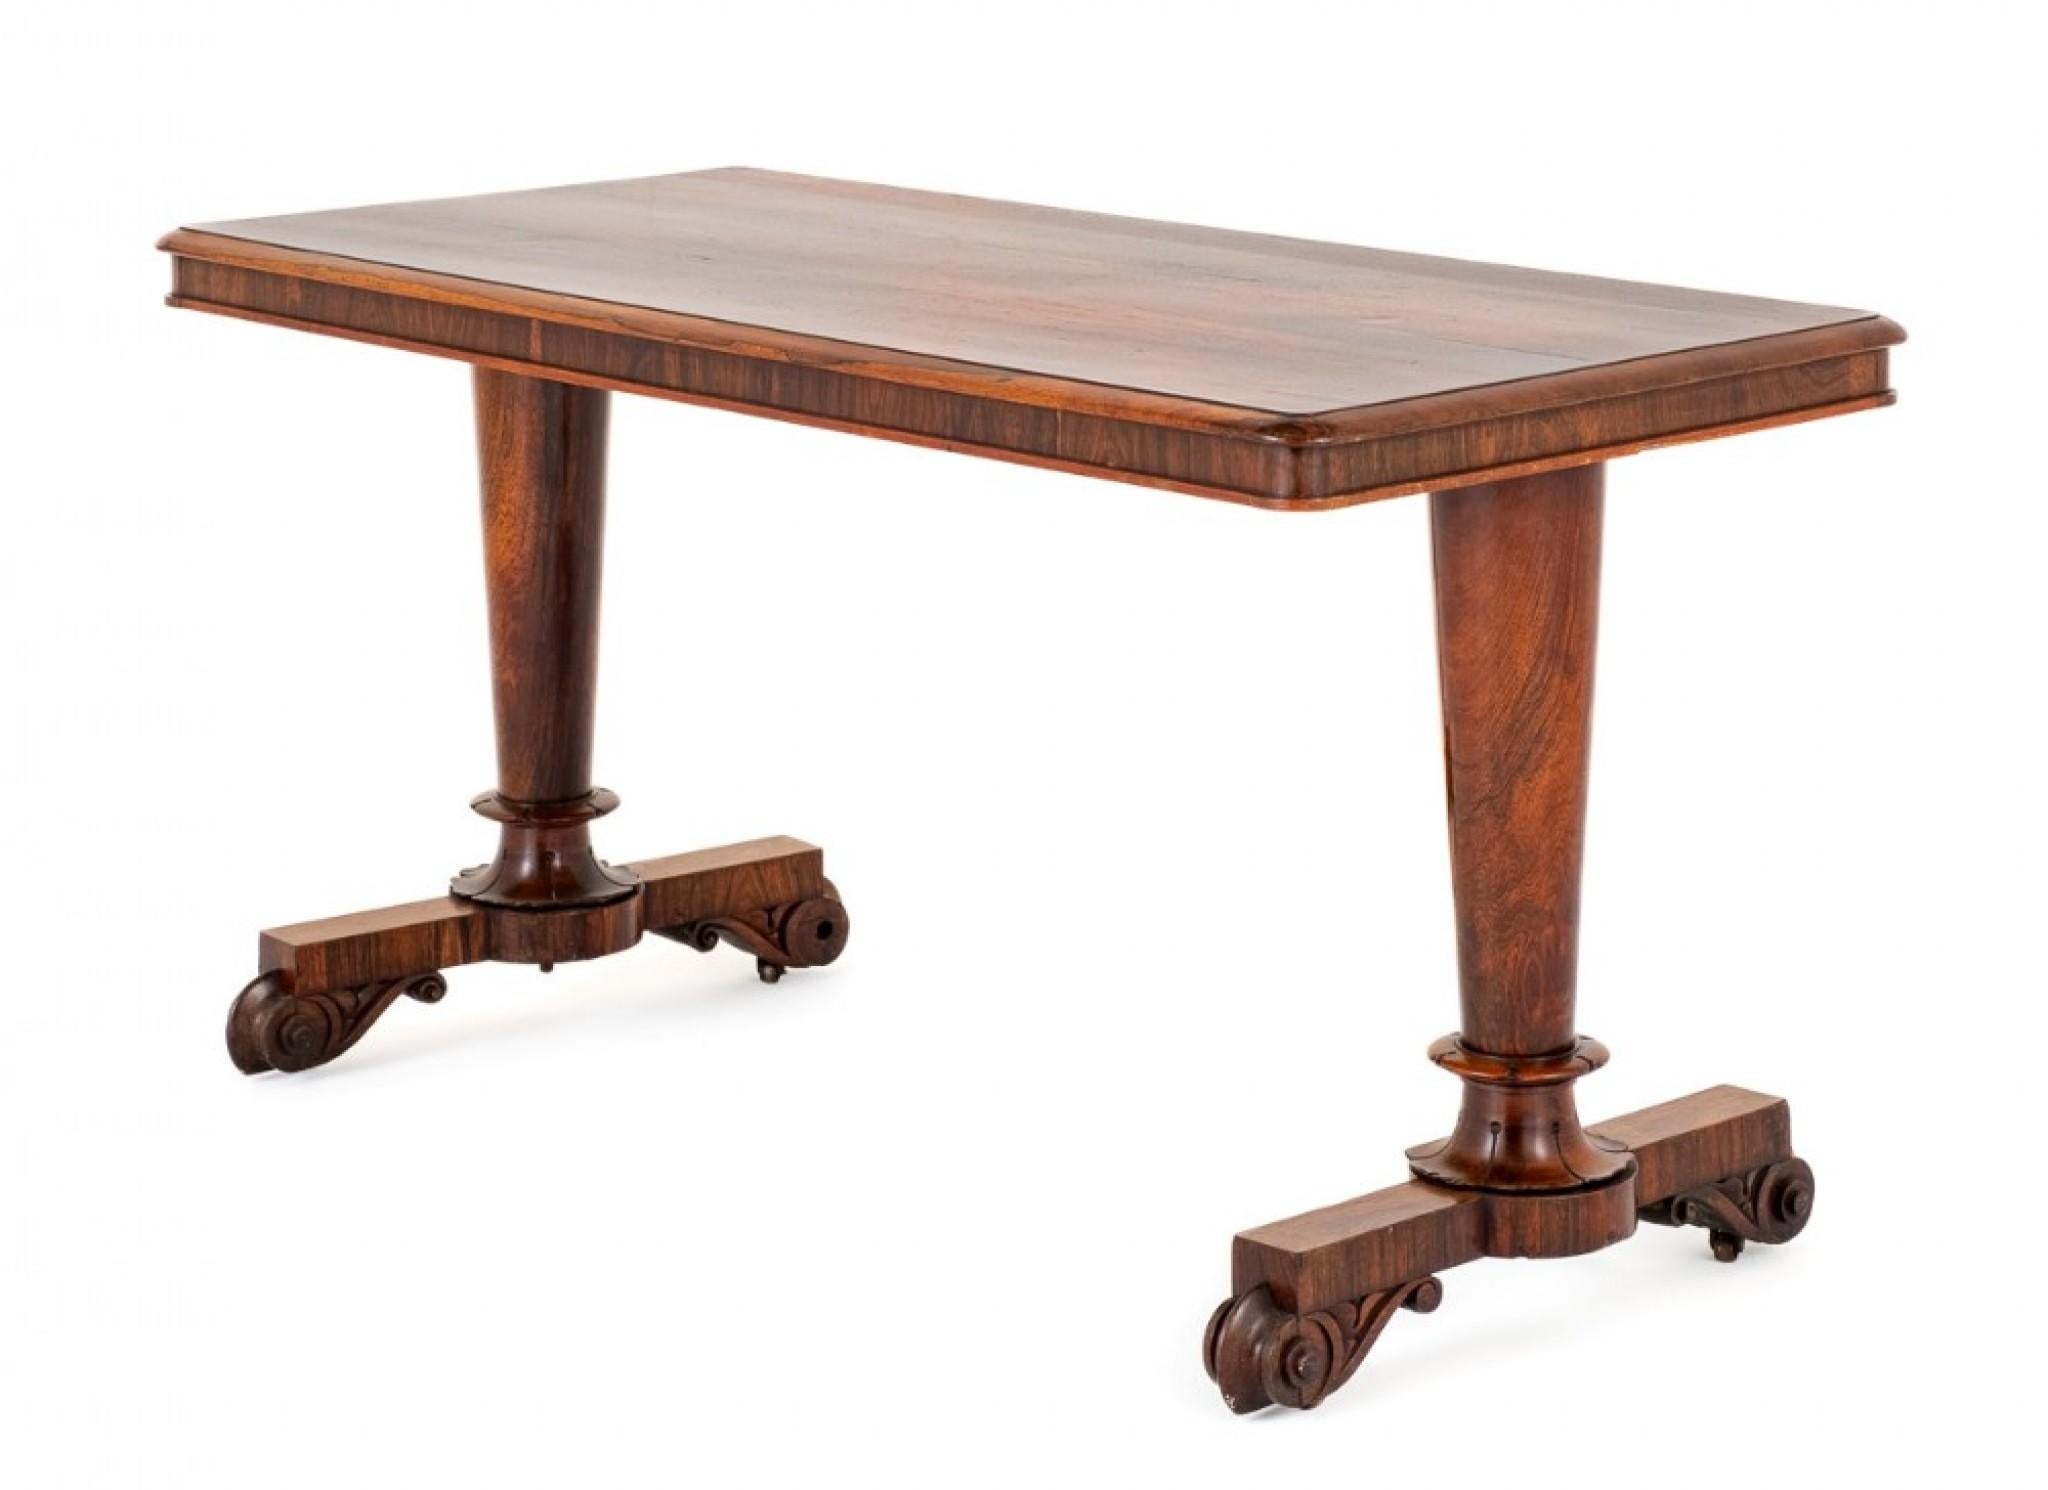 William IV rosewood library table. This library table features a highly figured Rio rosewood top. Circa 1800 The top is supported by turned columns which have turned and carved collars. The piece is finished off with carved feet.
Viewing by